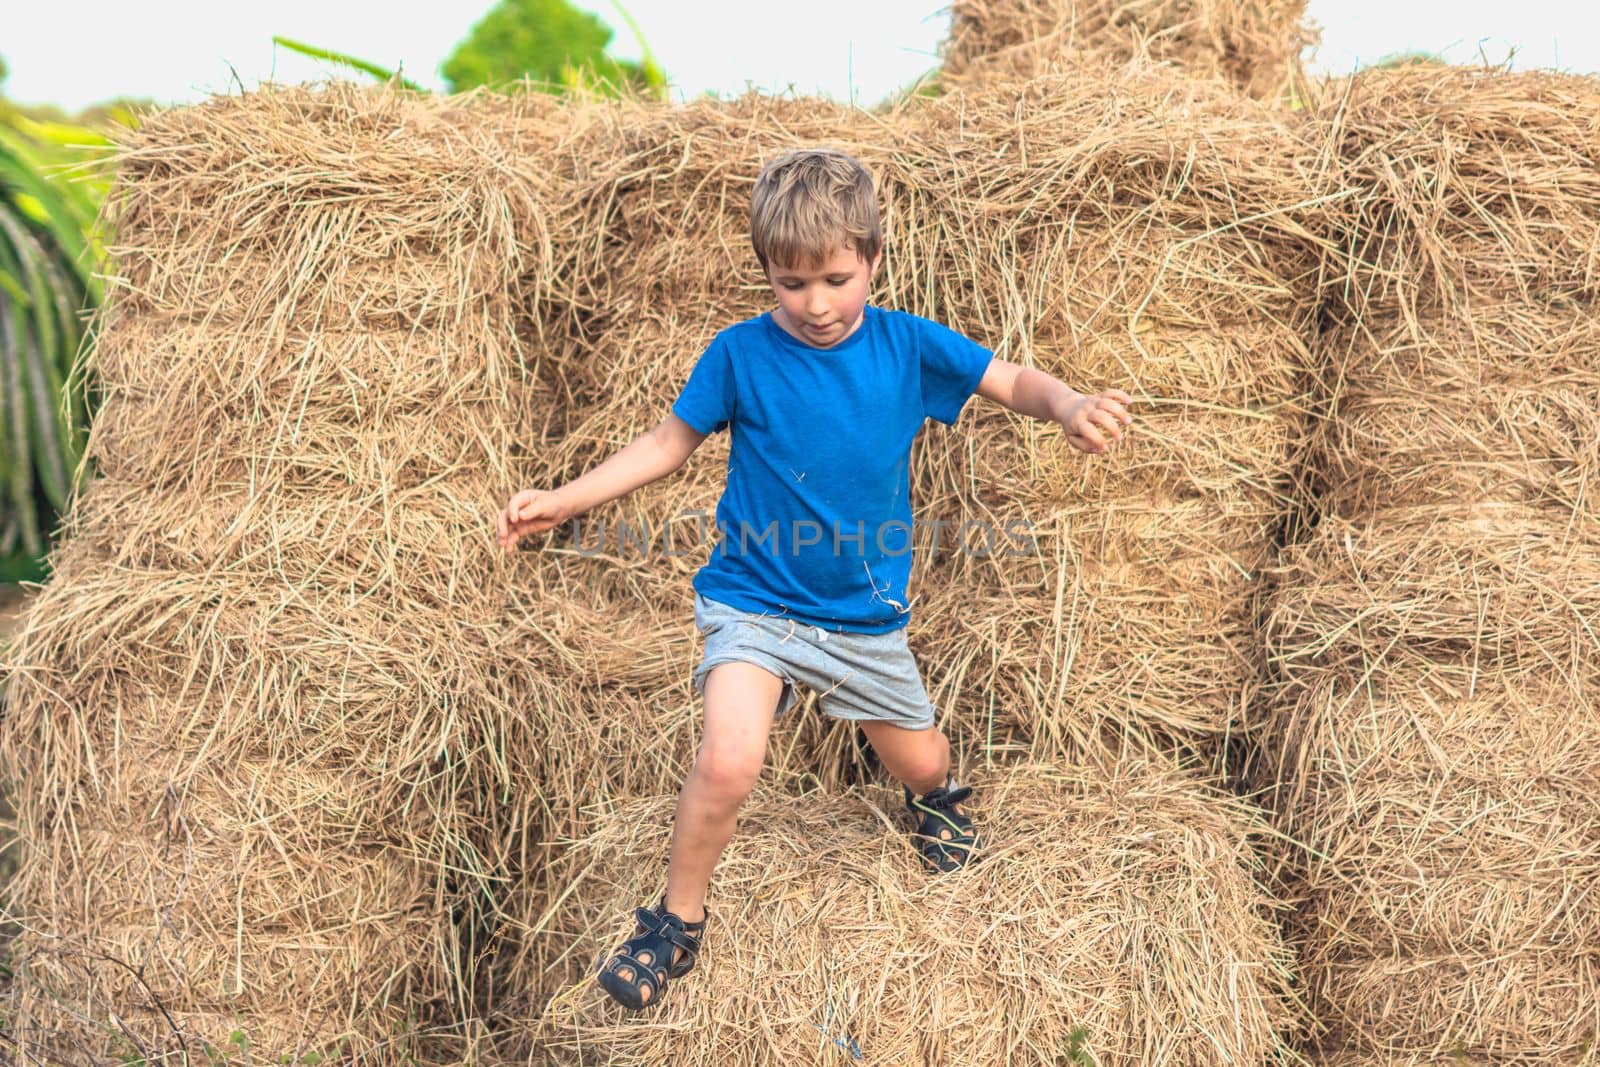 Boy blue t-shirt smile play climbs on down haystack bales of dry hay, clear sky sunny day. Outdoor kid children summer leisure activities. Concept happy childhood countryside, air close to nature.